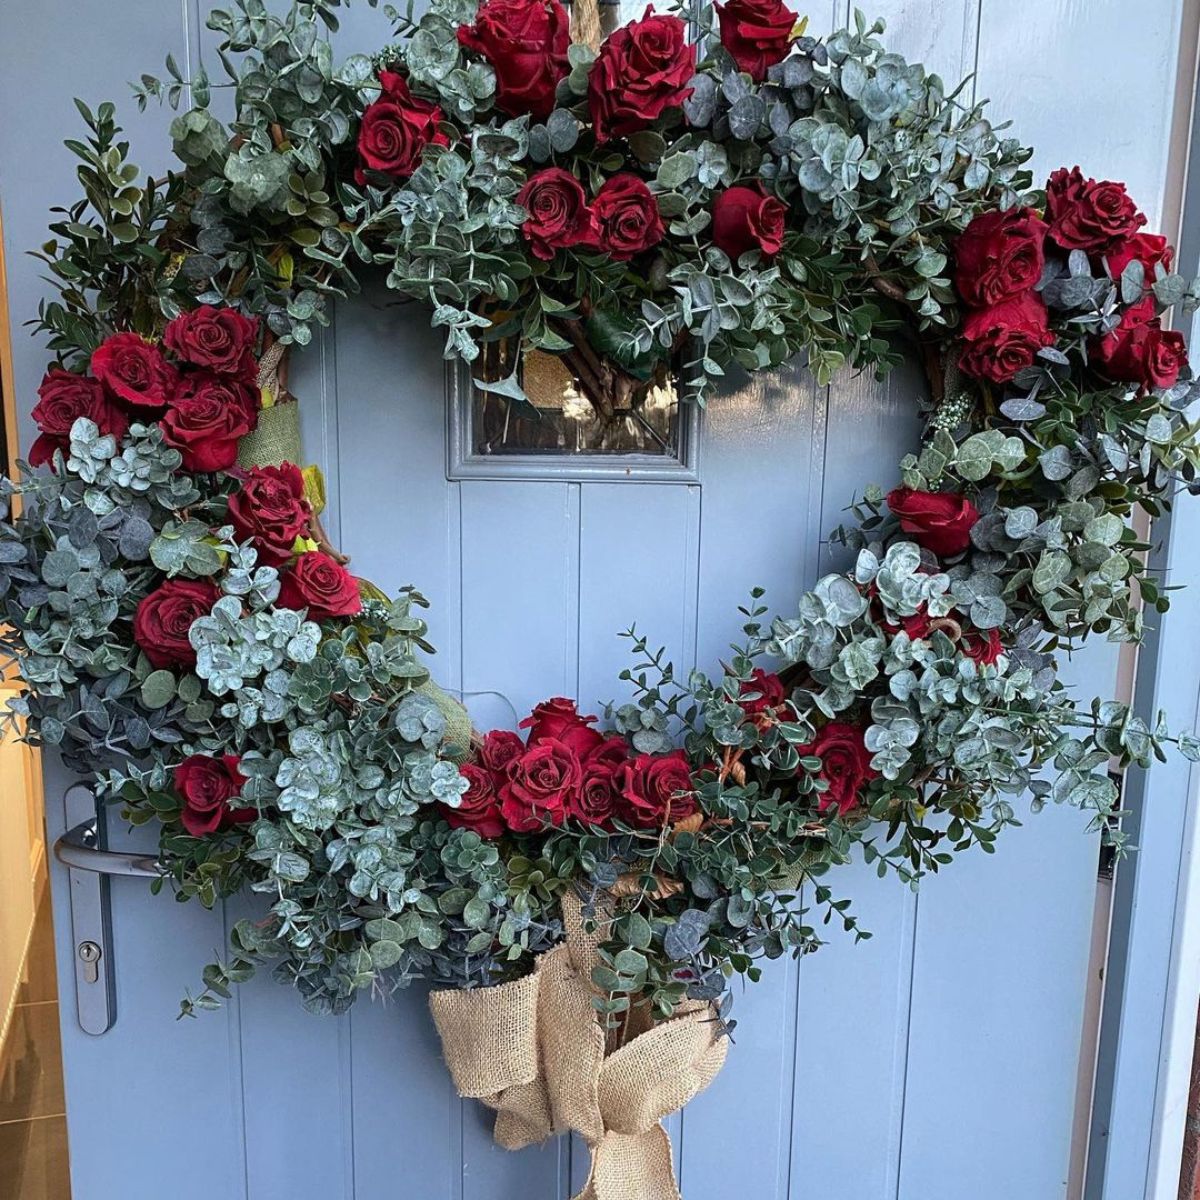 Red rose and eucalyptus valentines wreath